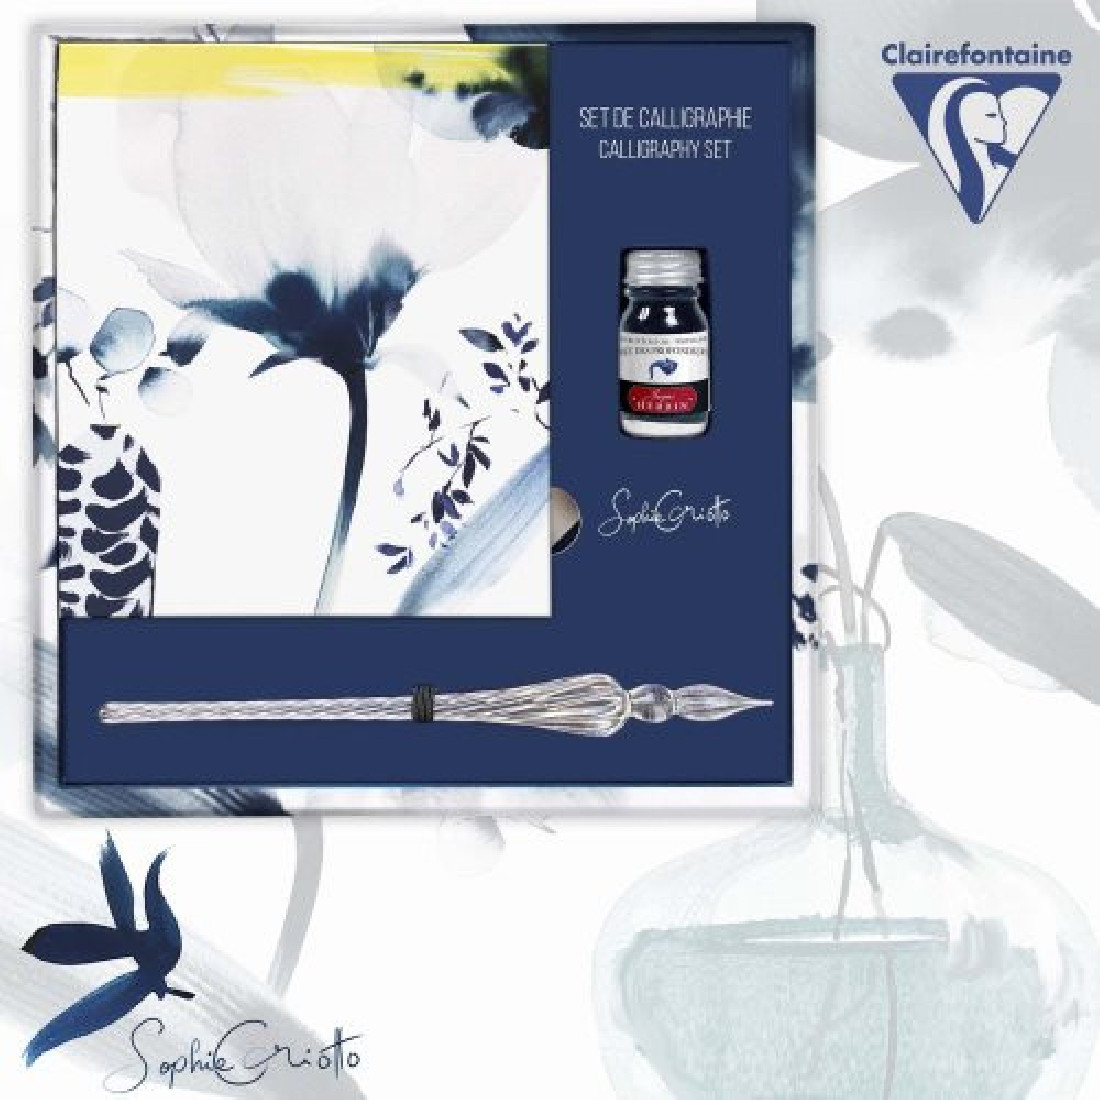 Clairefontaine Calligraphie set with glass pen, art notebook ang bottled ink